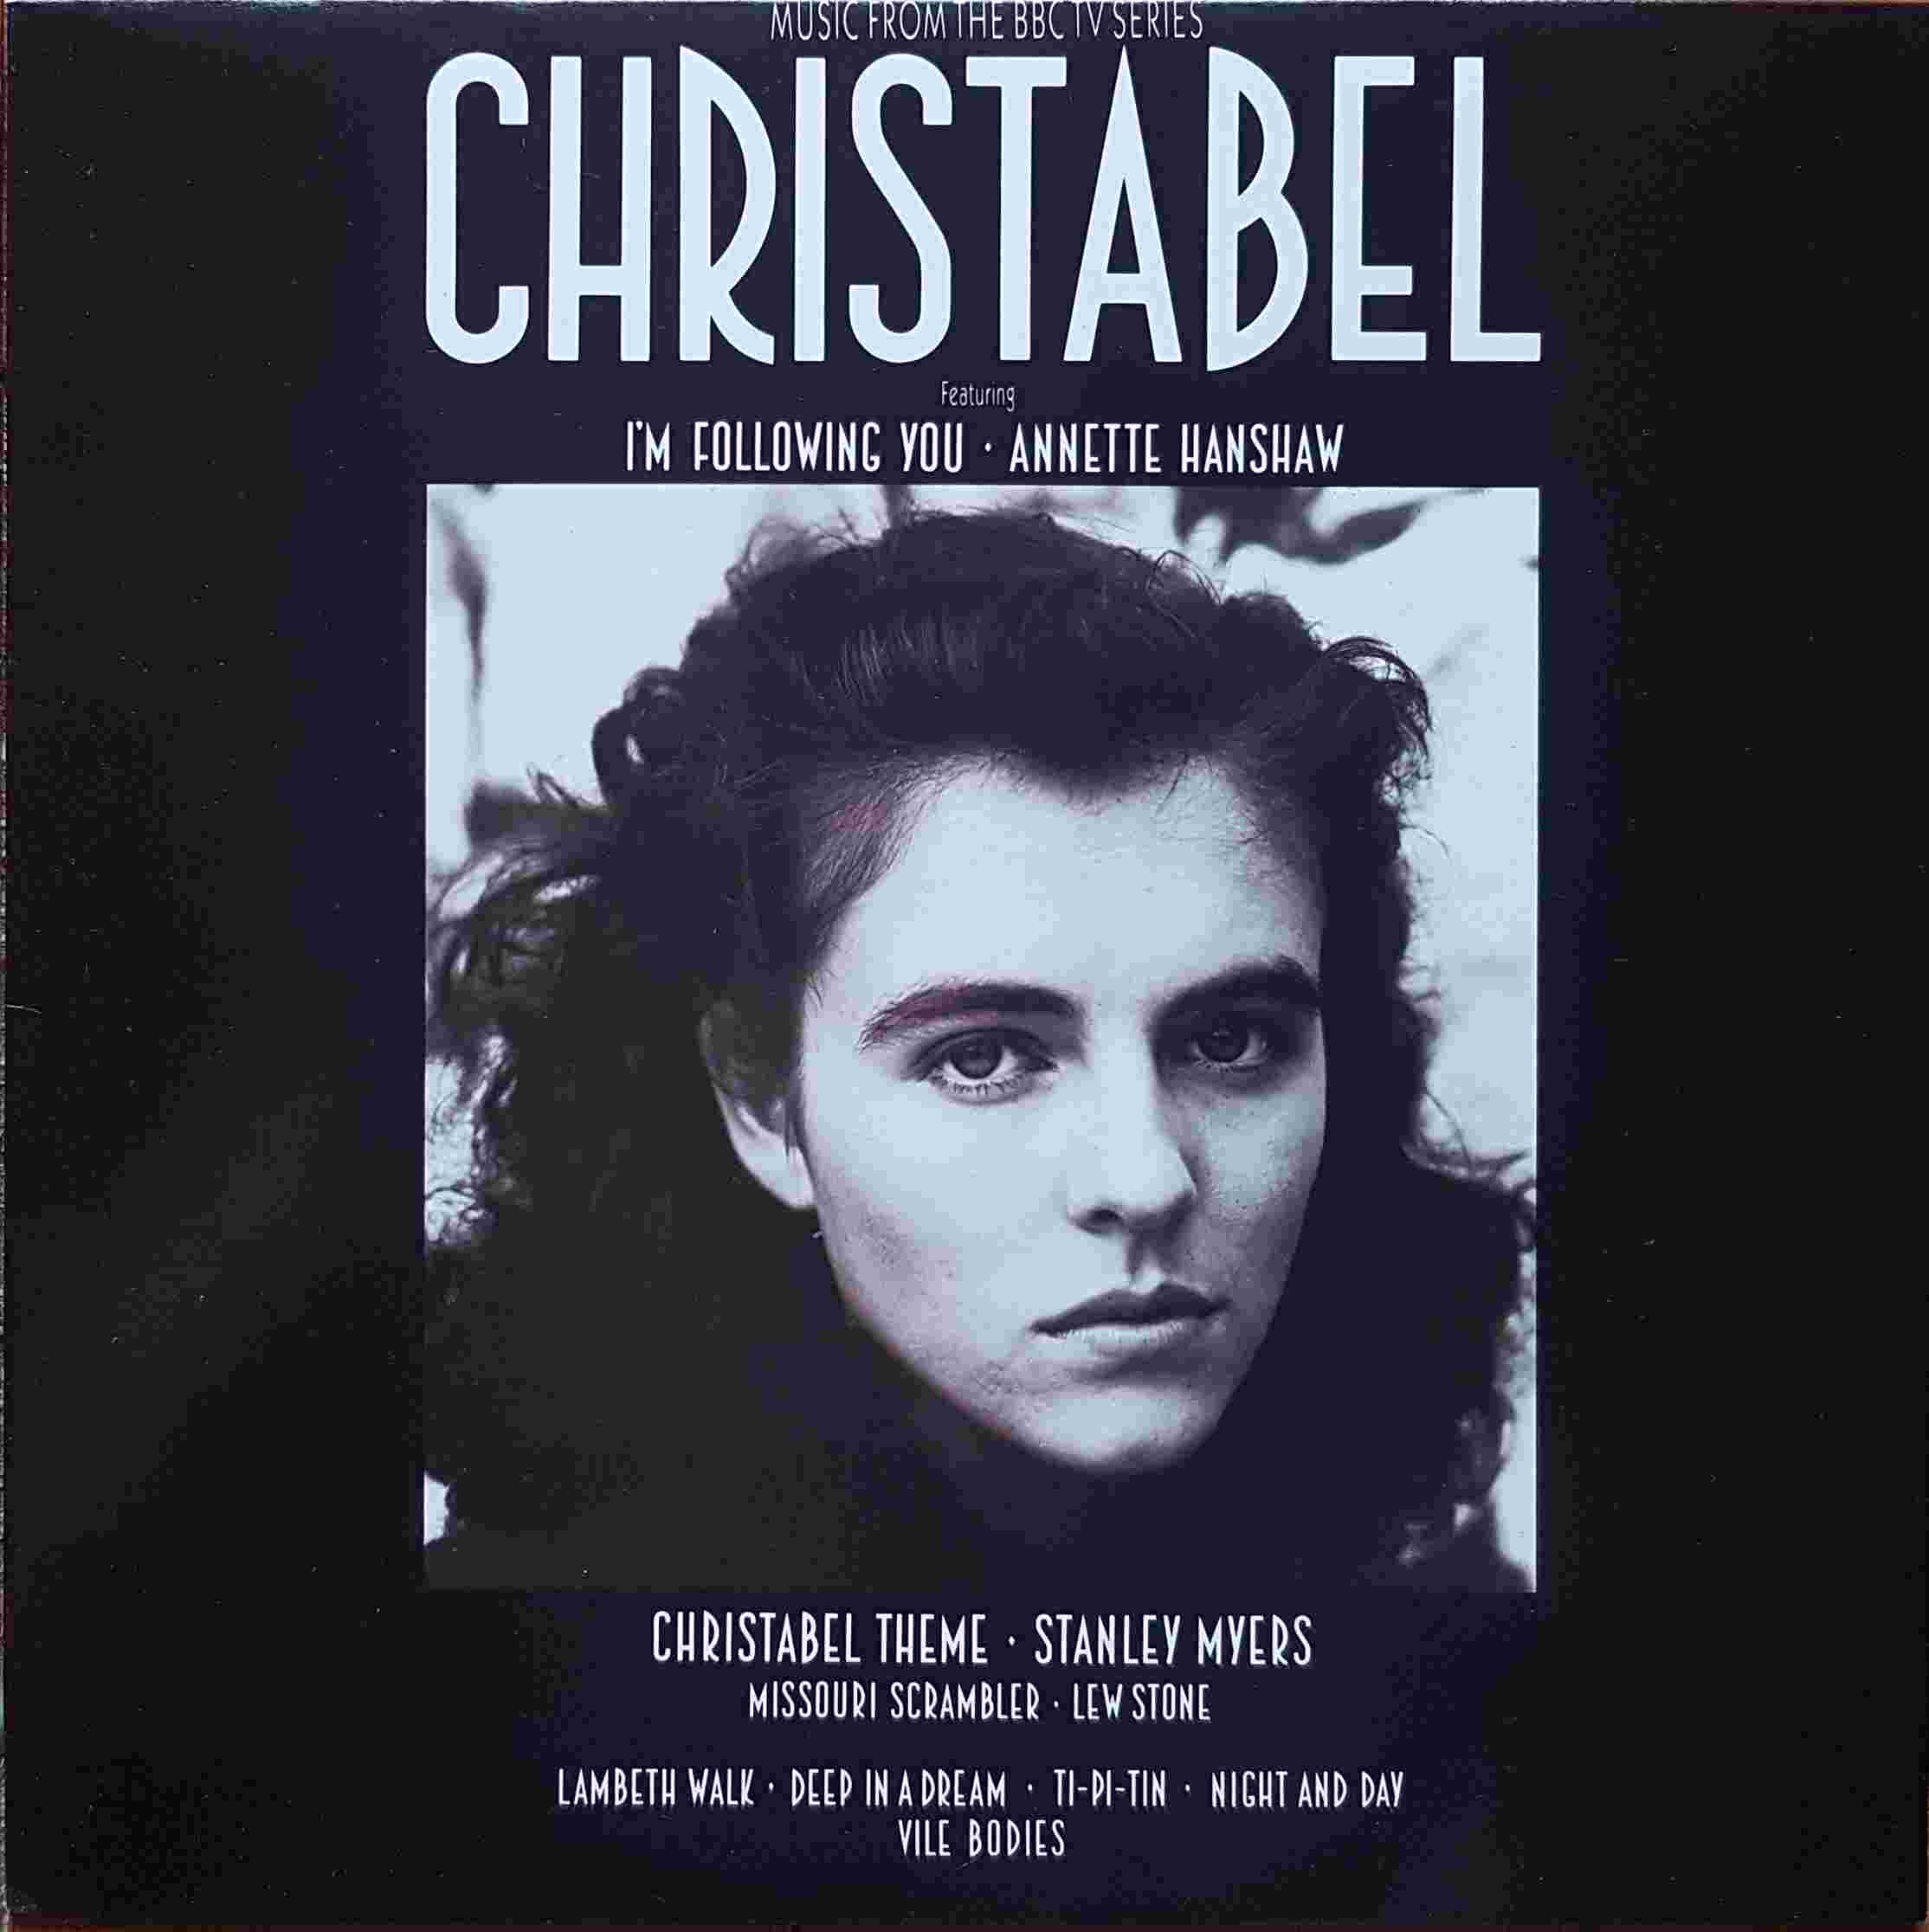 Picture of 12 RXL 229 Christabel by artist Myers / Gay / Lange from the BBC 12inches - Records and Tapes library